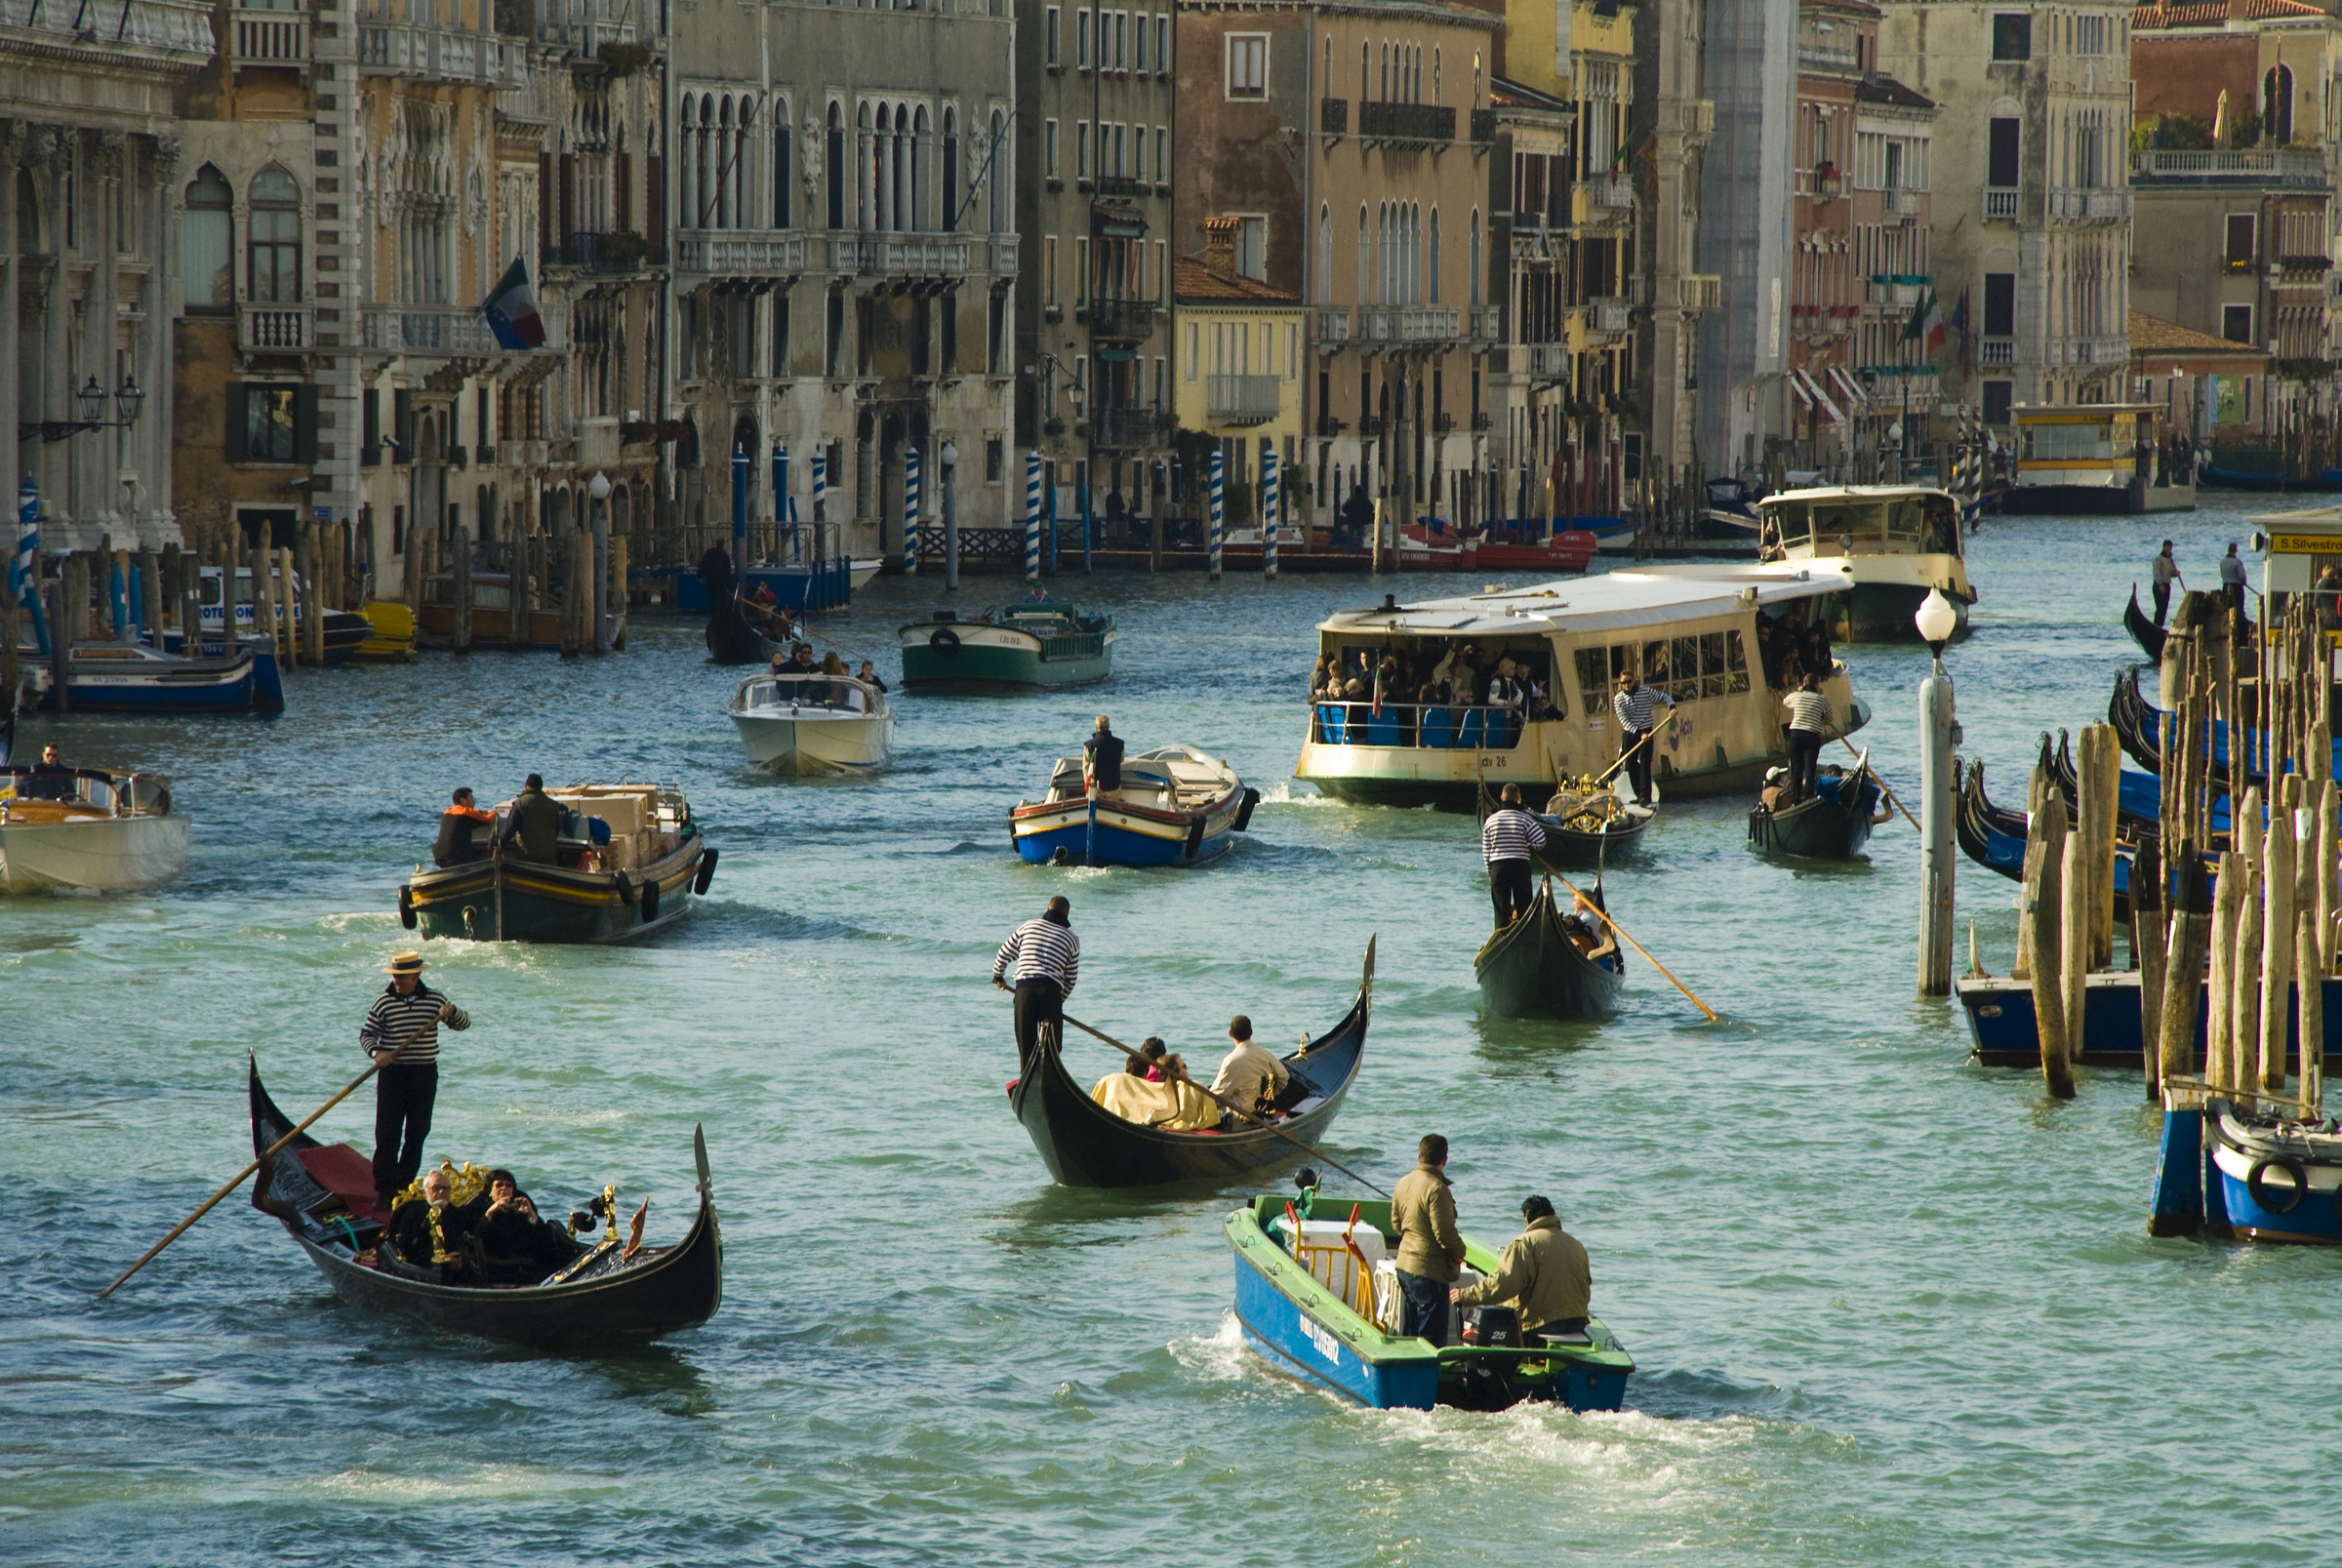 Venice steps away from using gas-guzzling boats